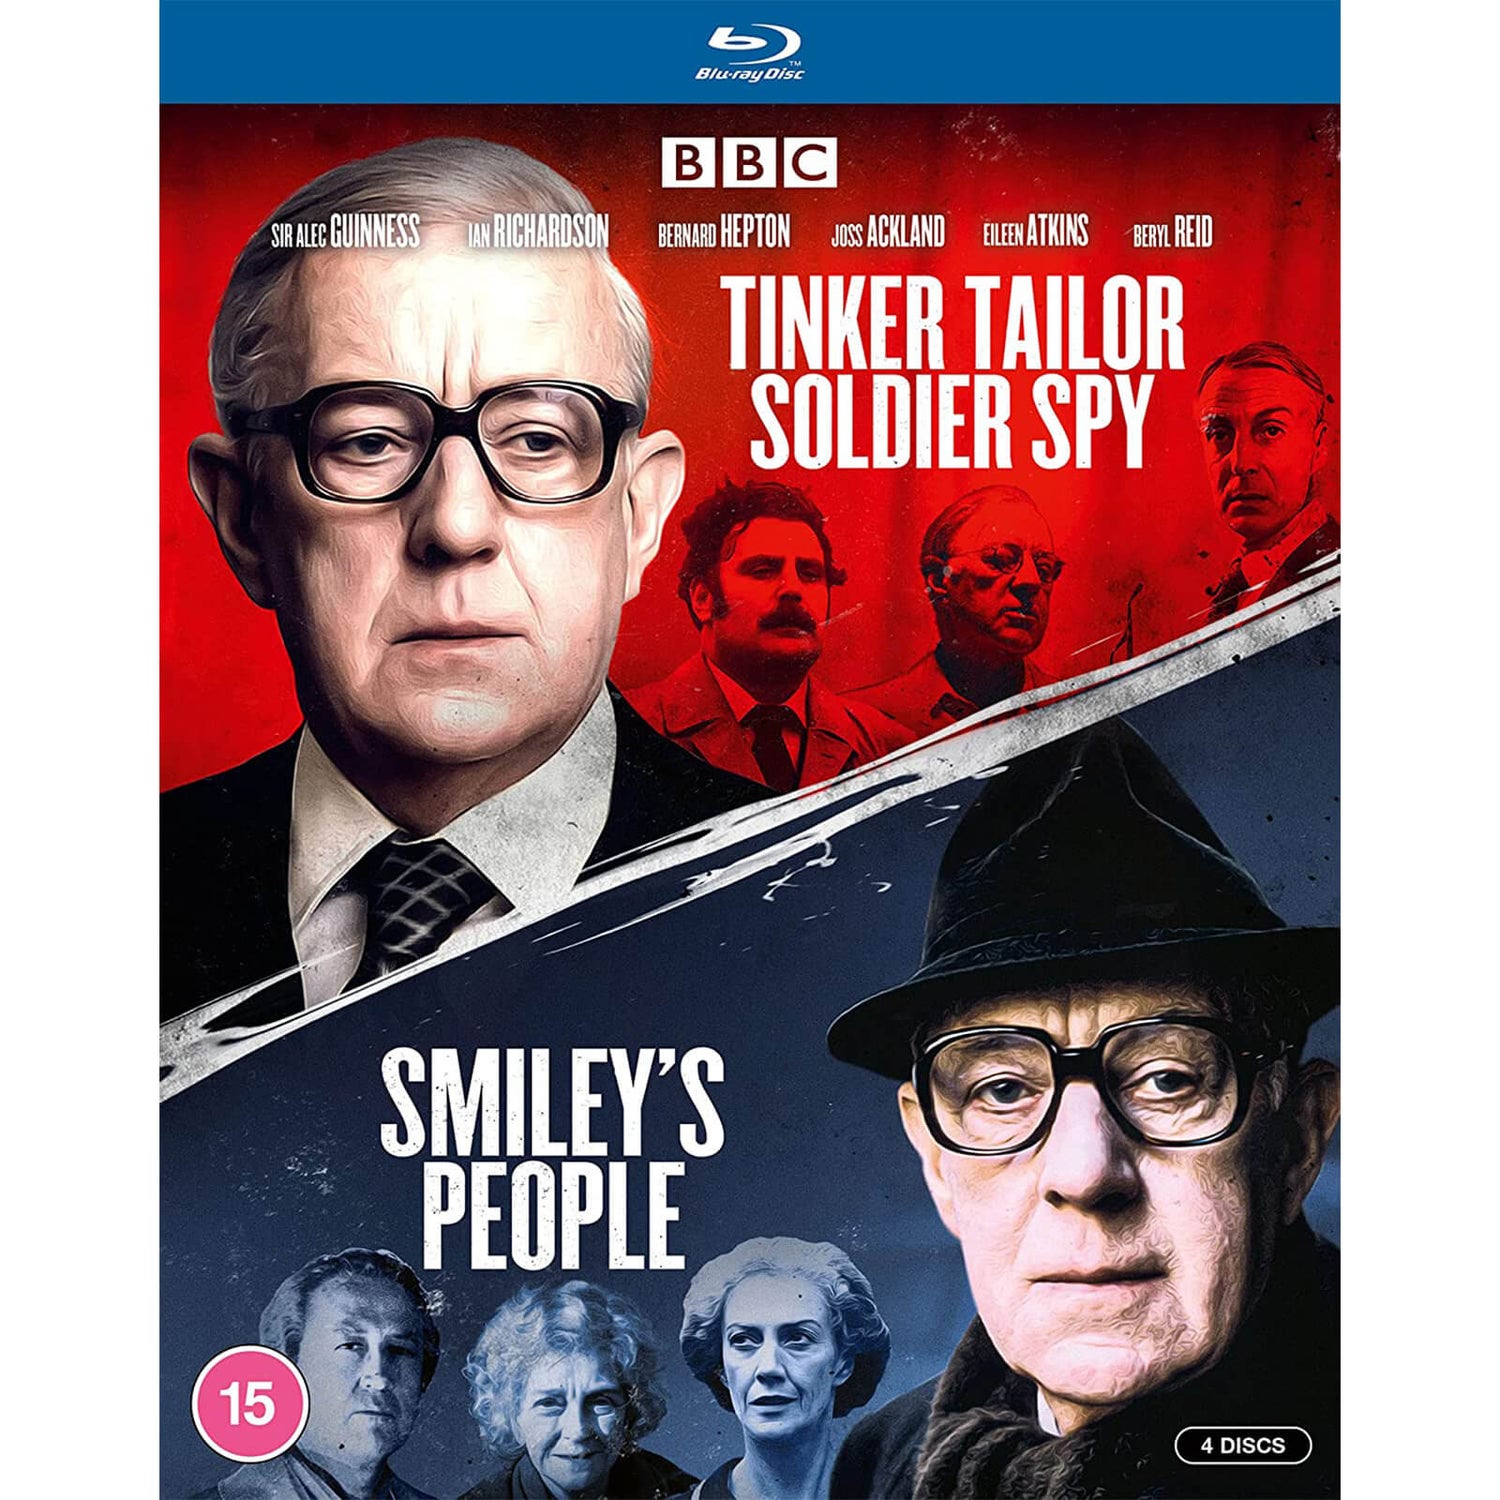 Tinker, Tailor, Soldier, Spy & Smiley's People boxset